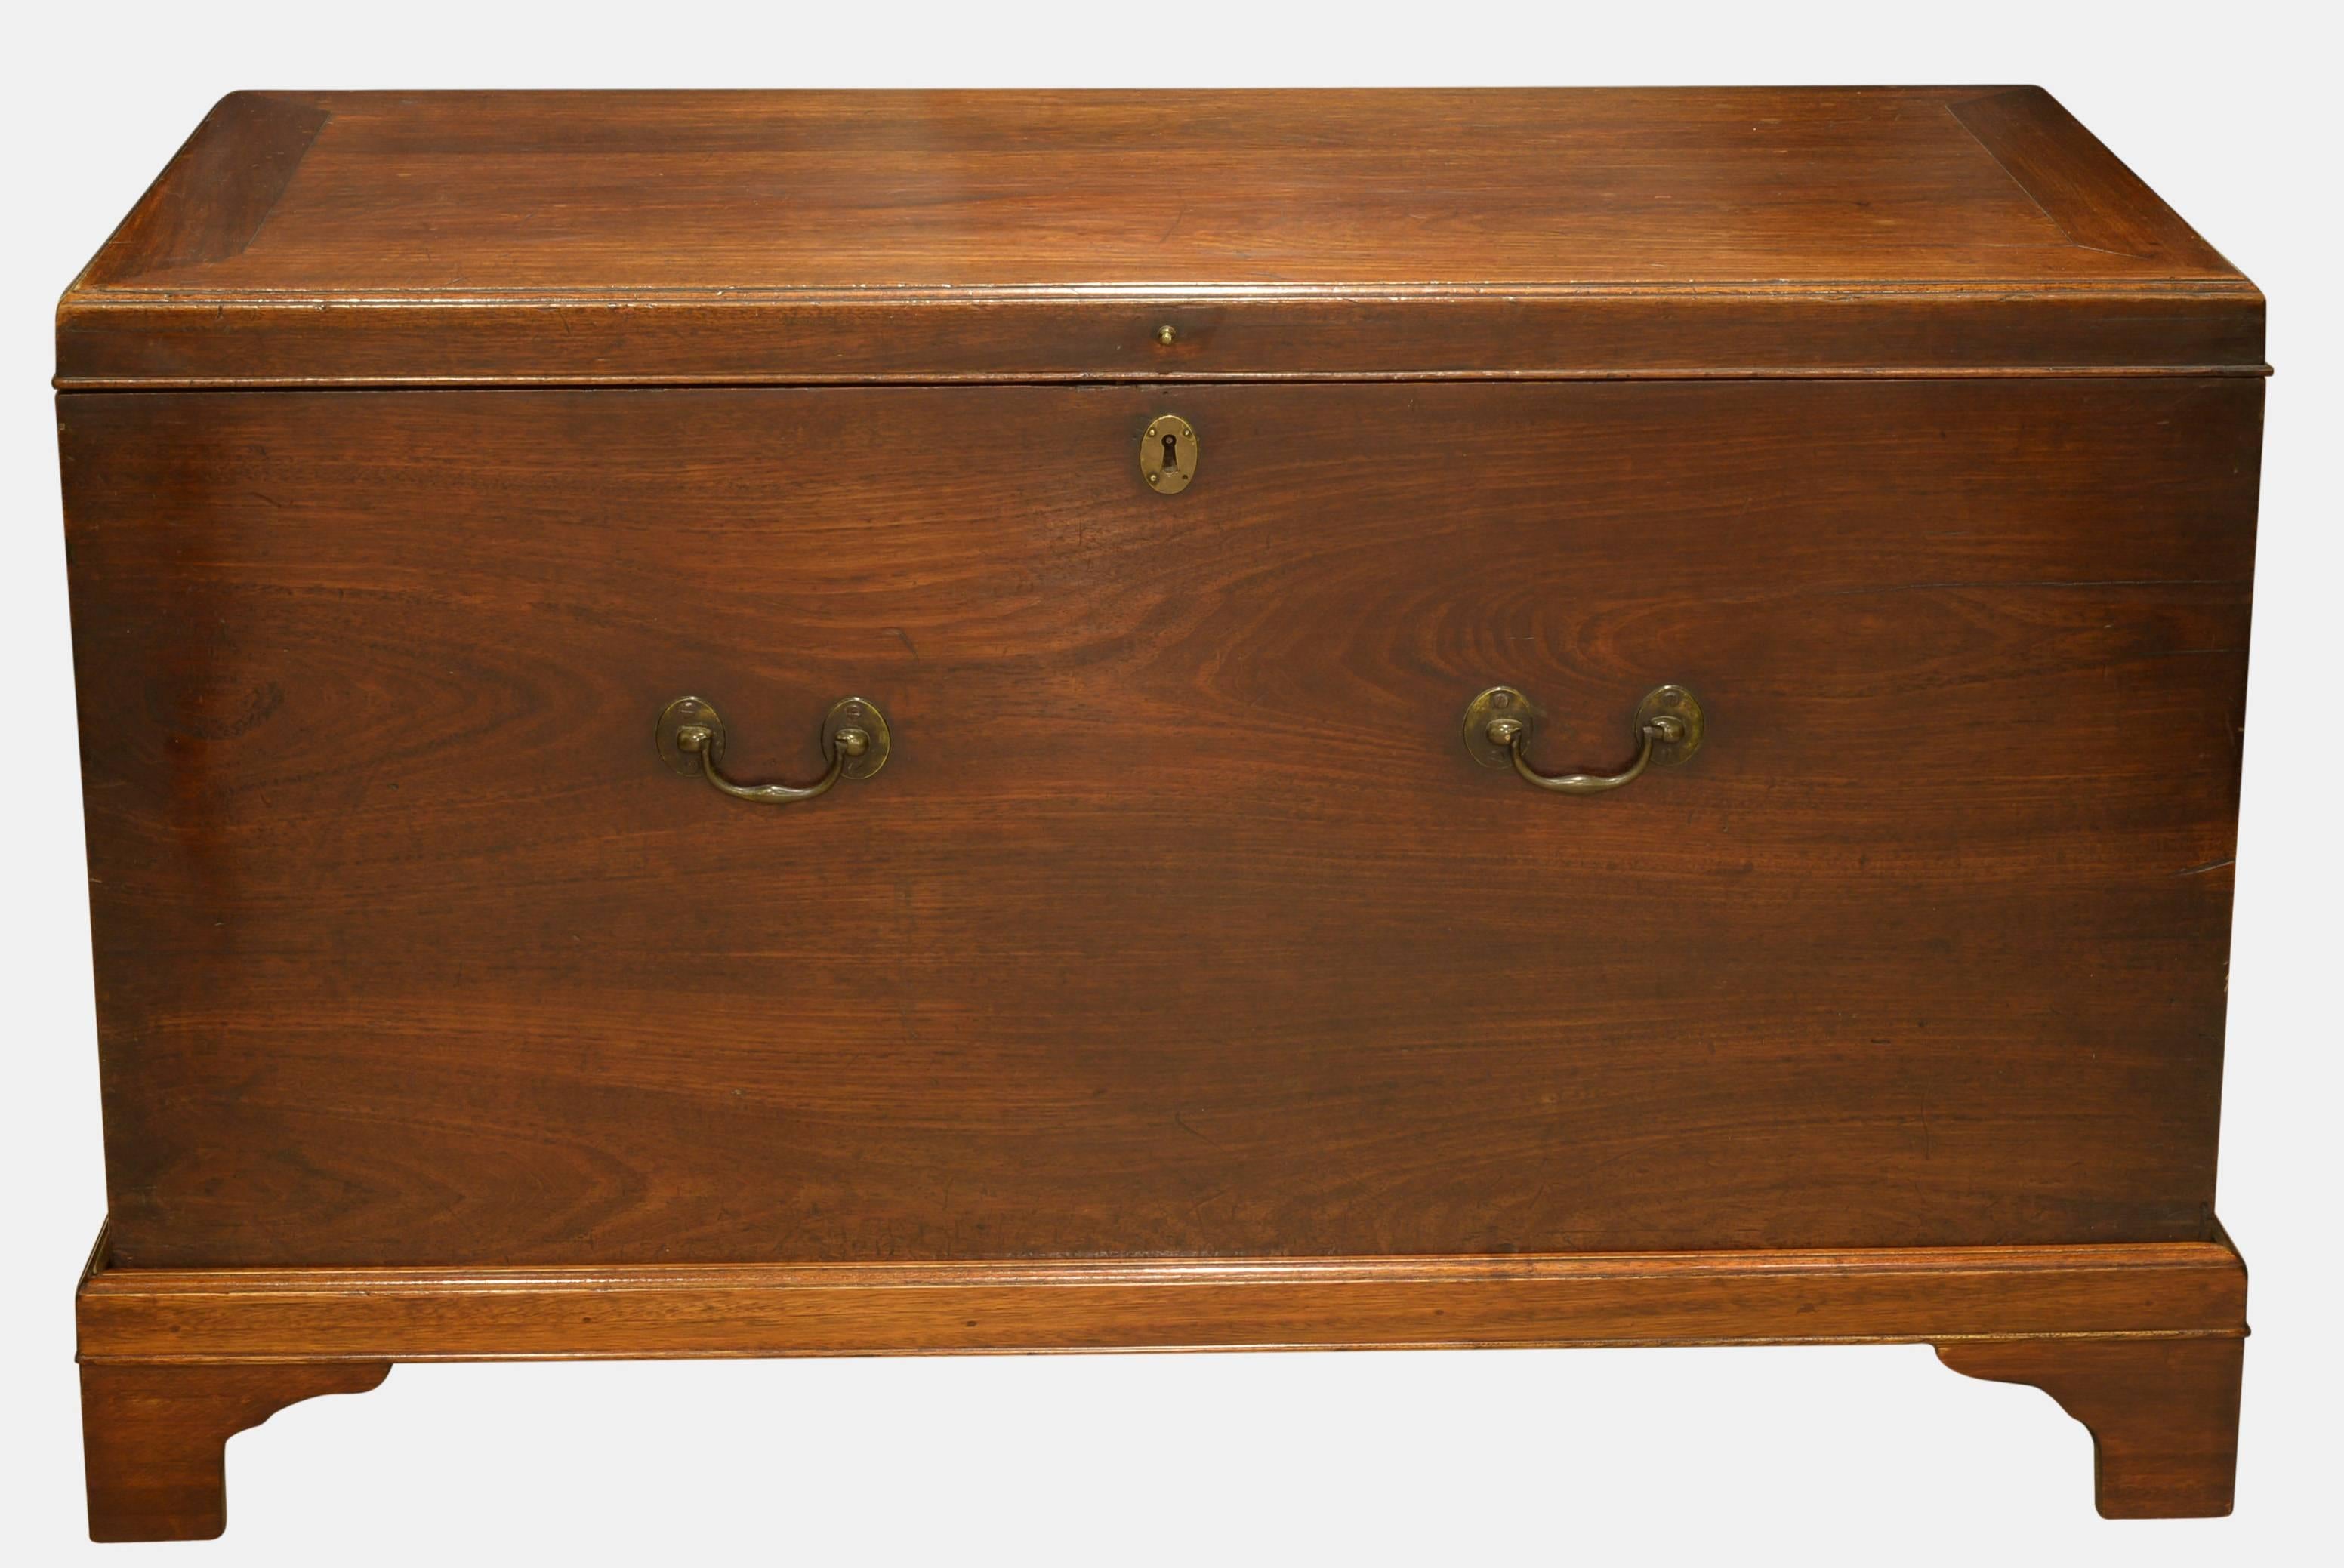 A Chippendale period mahogany storage chest with original bronze handles on a later bracket foot stand, circa 1760.

74cm (29.1